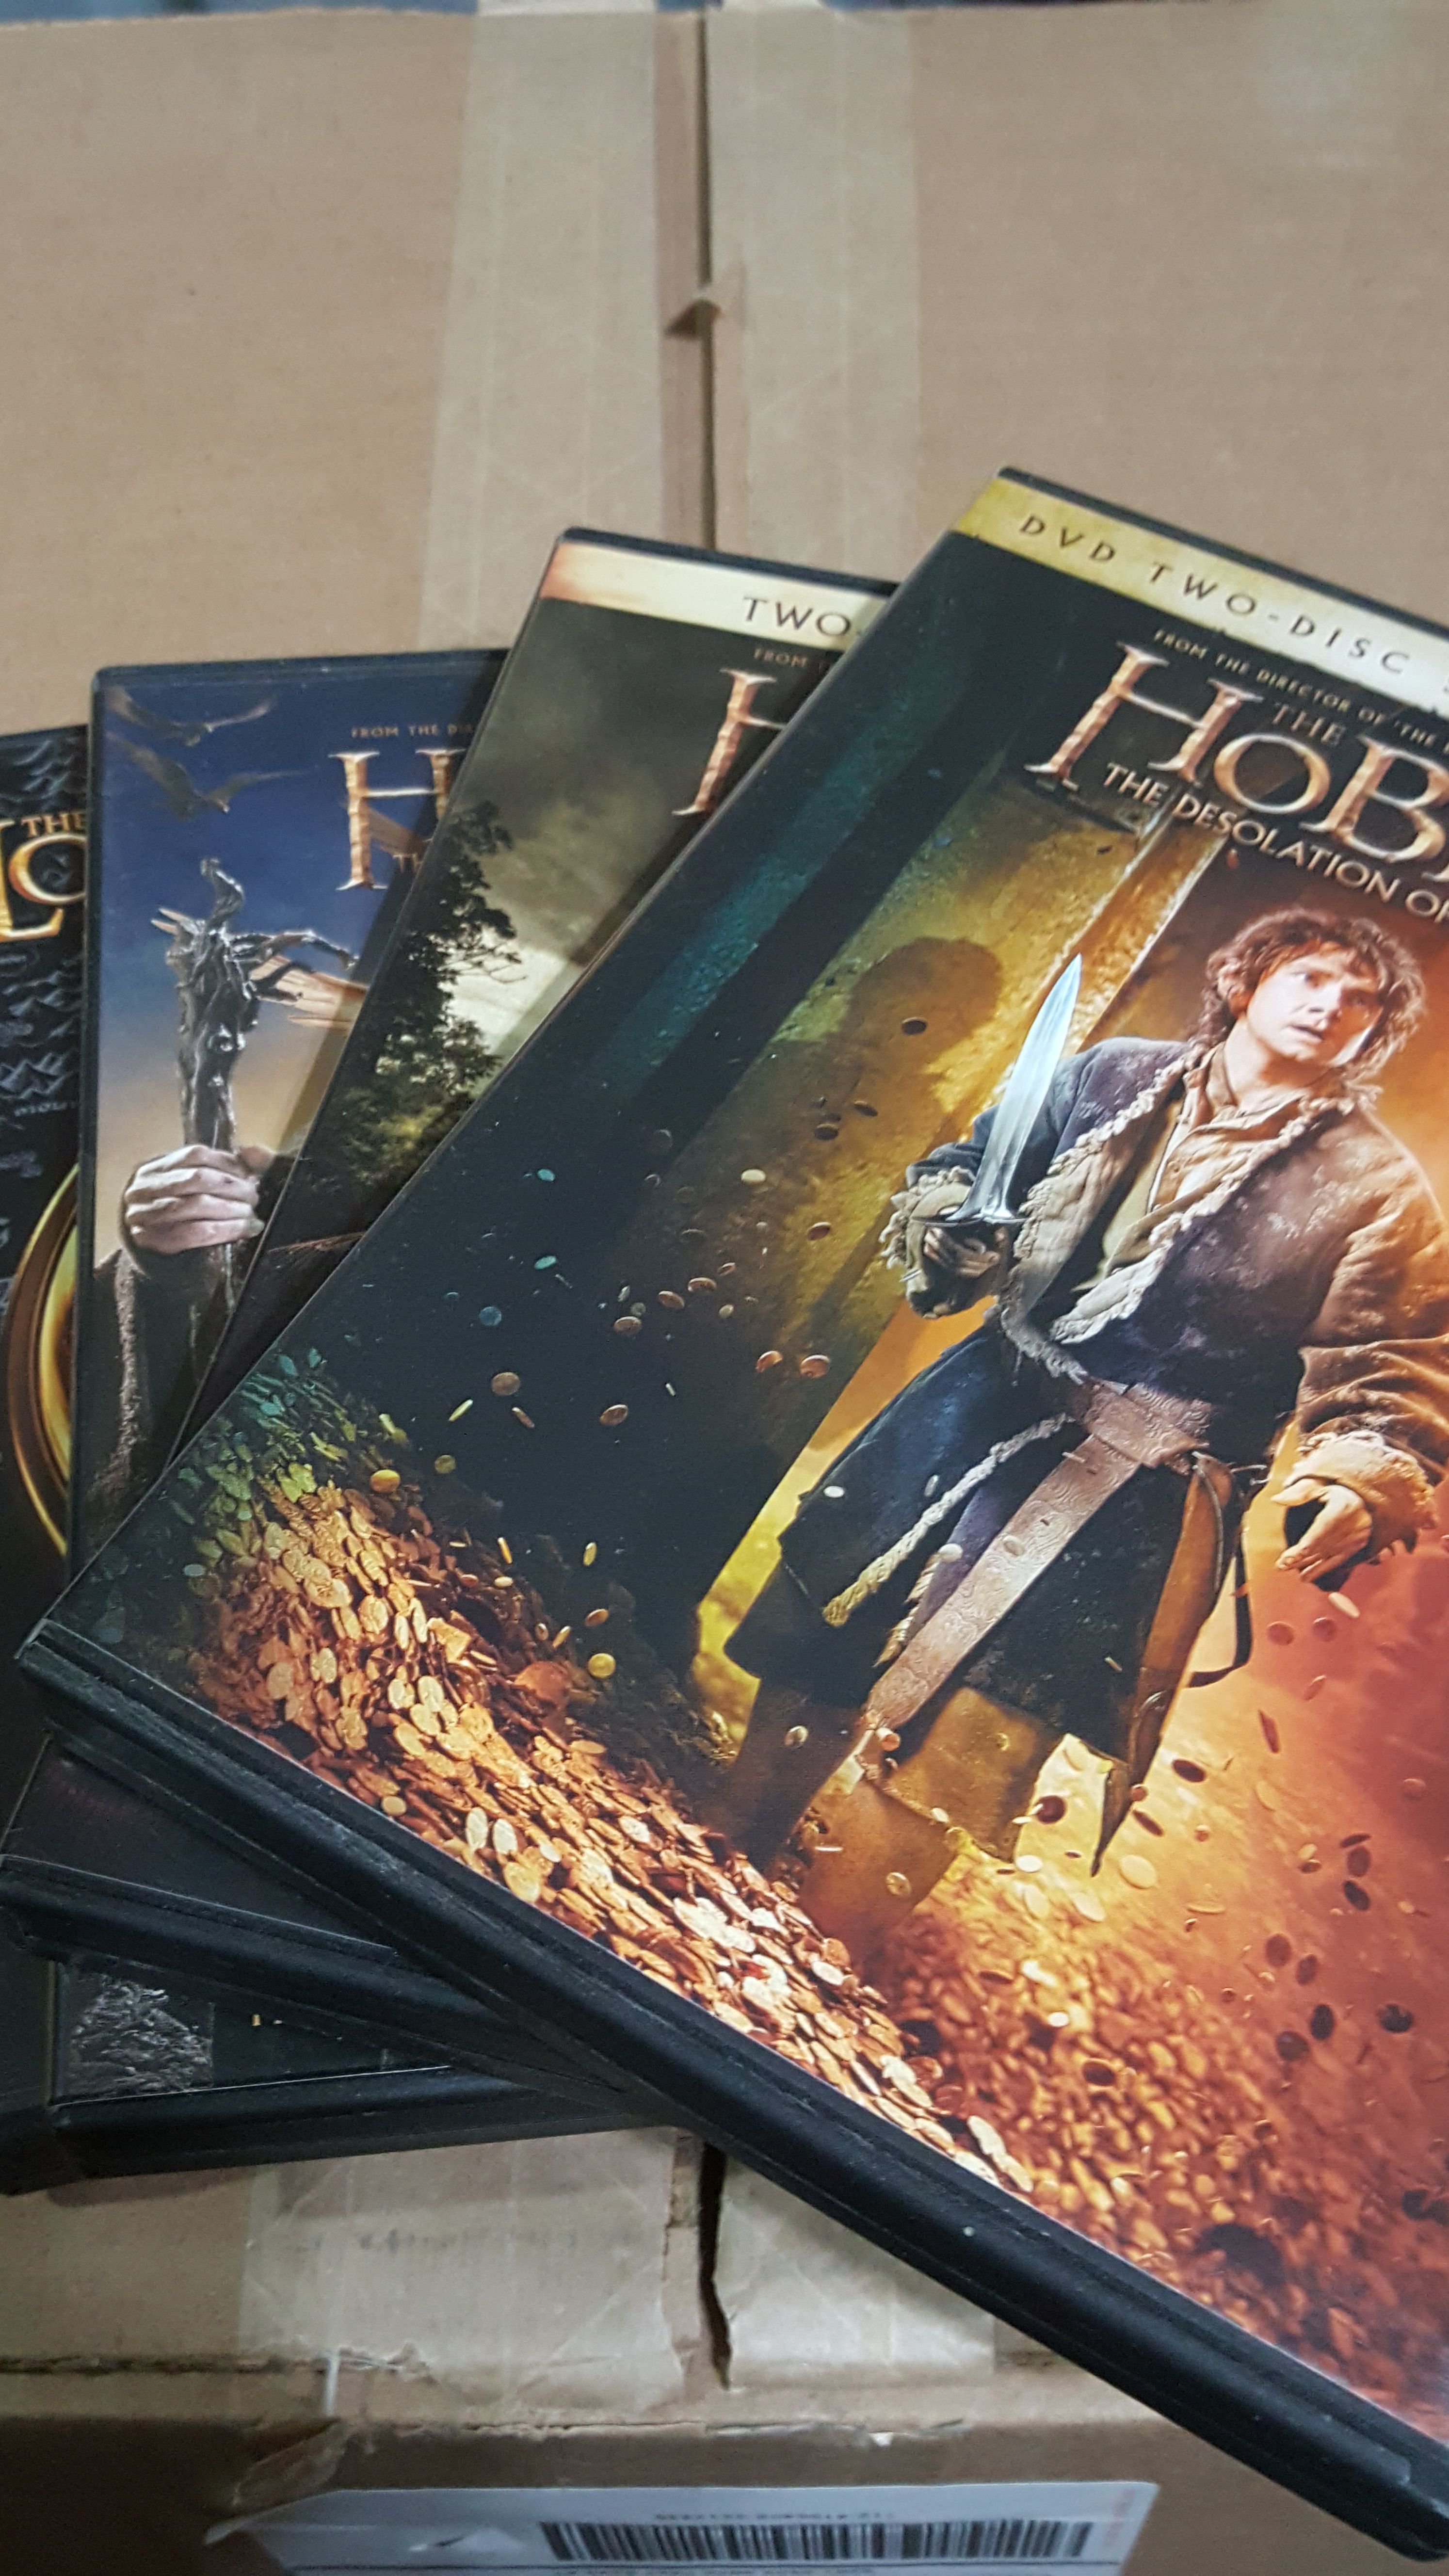 Lord of the Rings & The Hobbit 6 Movie Collection